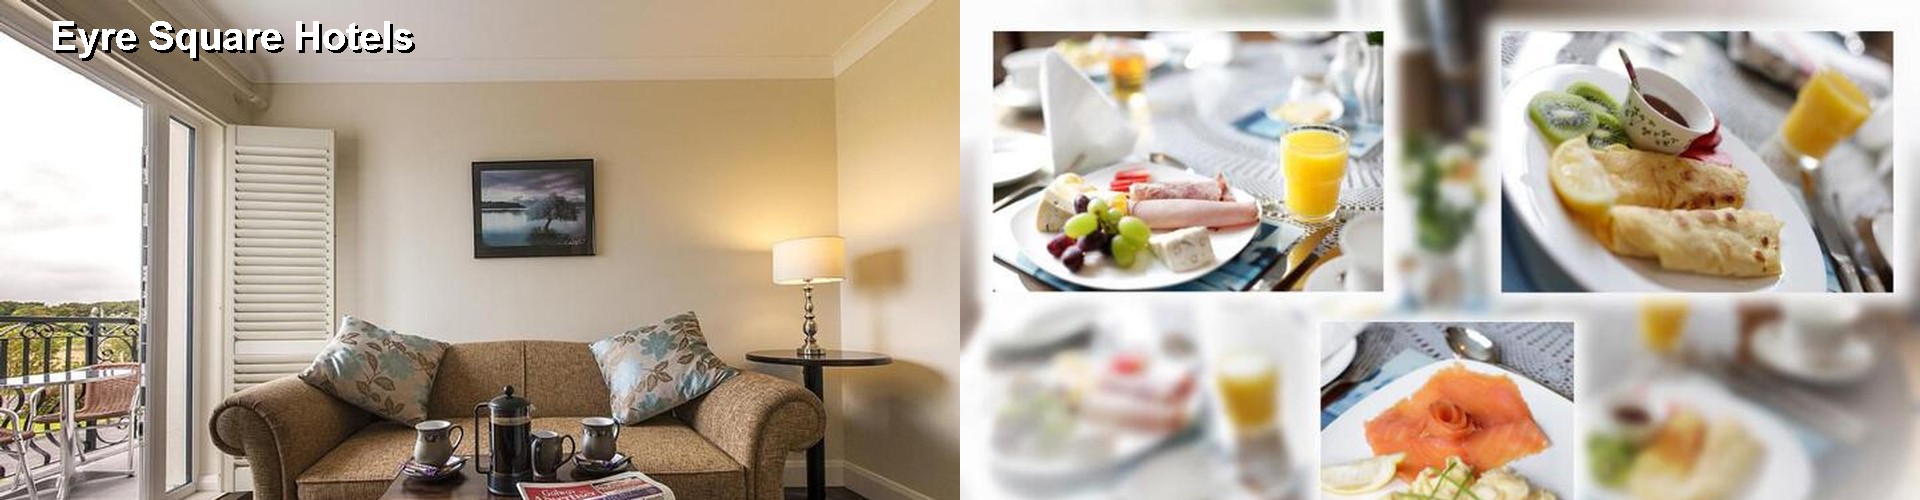 5 Best Hotels near Eyre Square